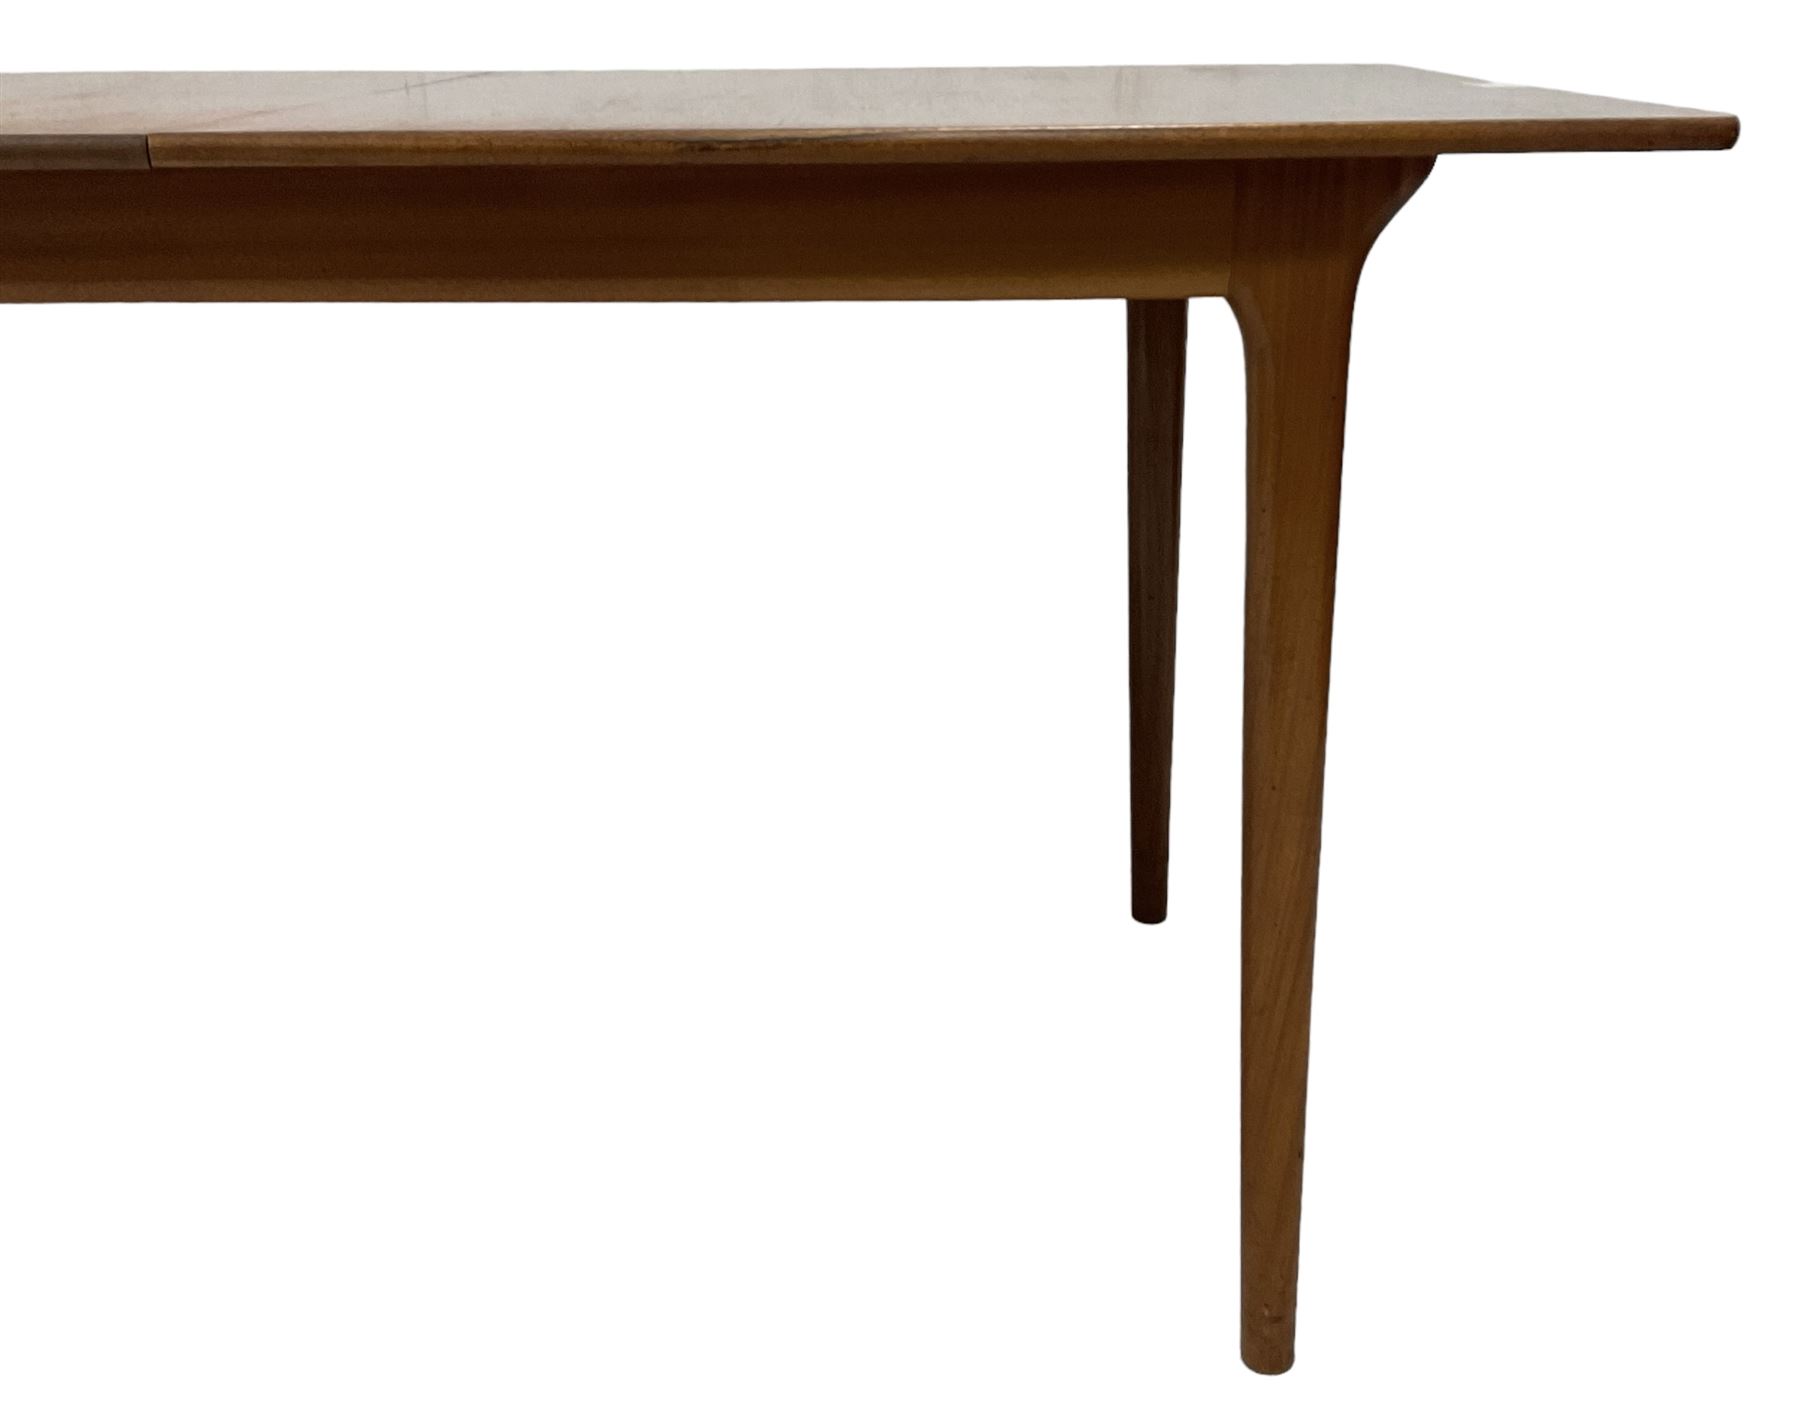 Tom Robertson for AH McIntosh & Co of Kirkaldy - mid-20th century teak extending dining table - Image 5 of 19